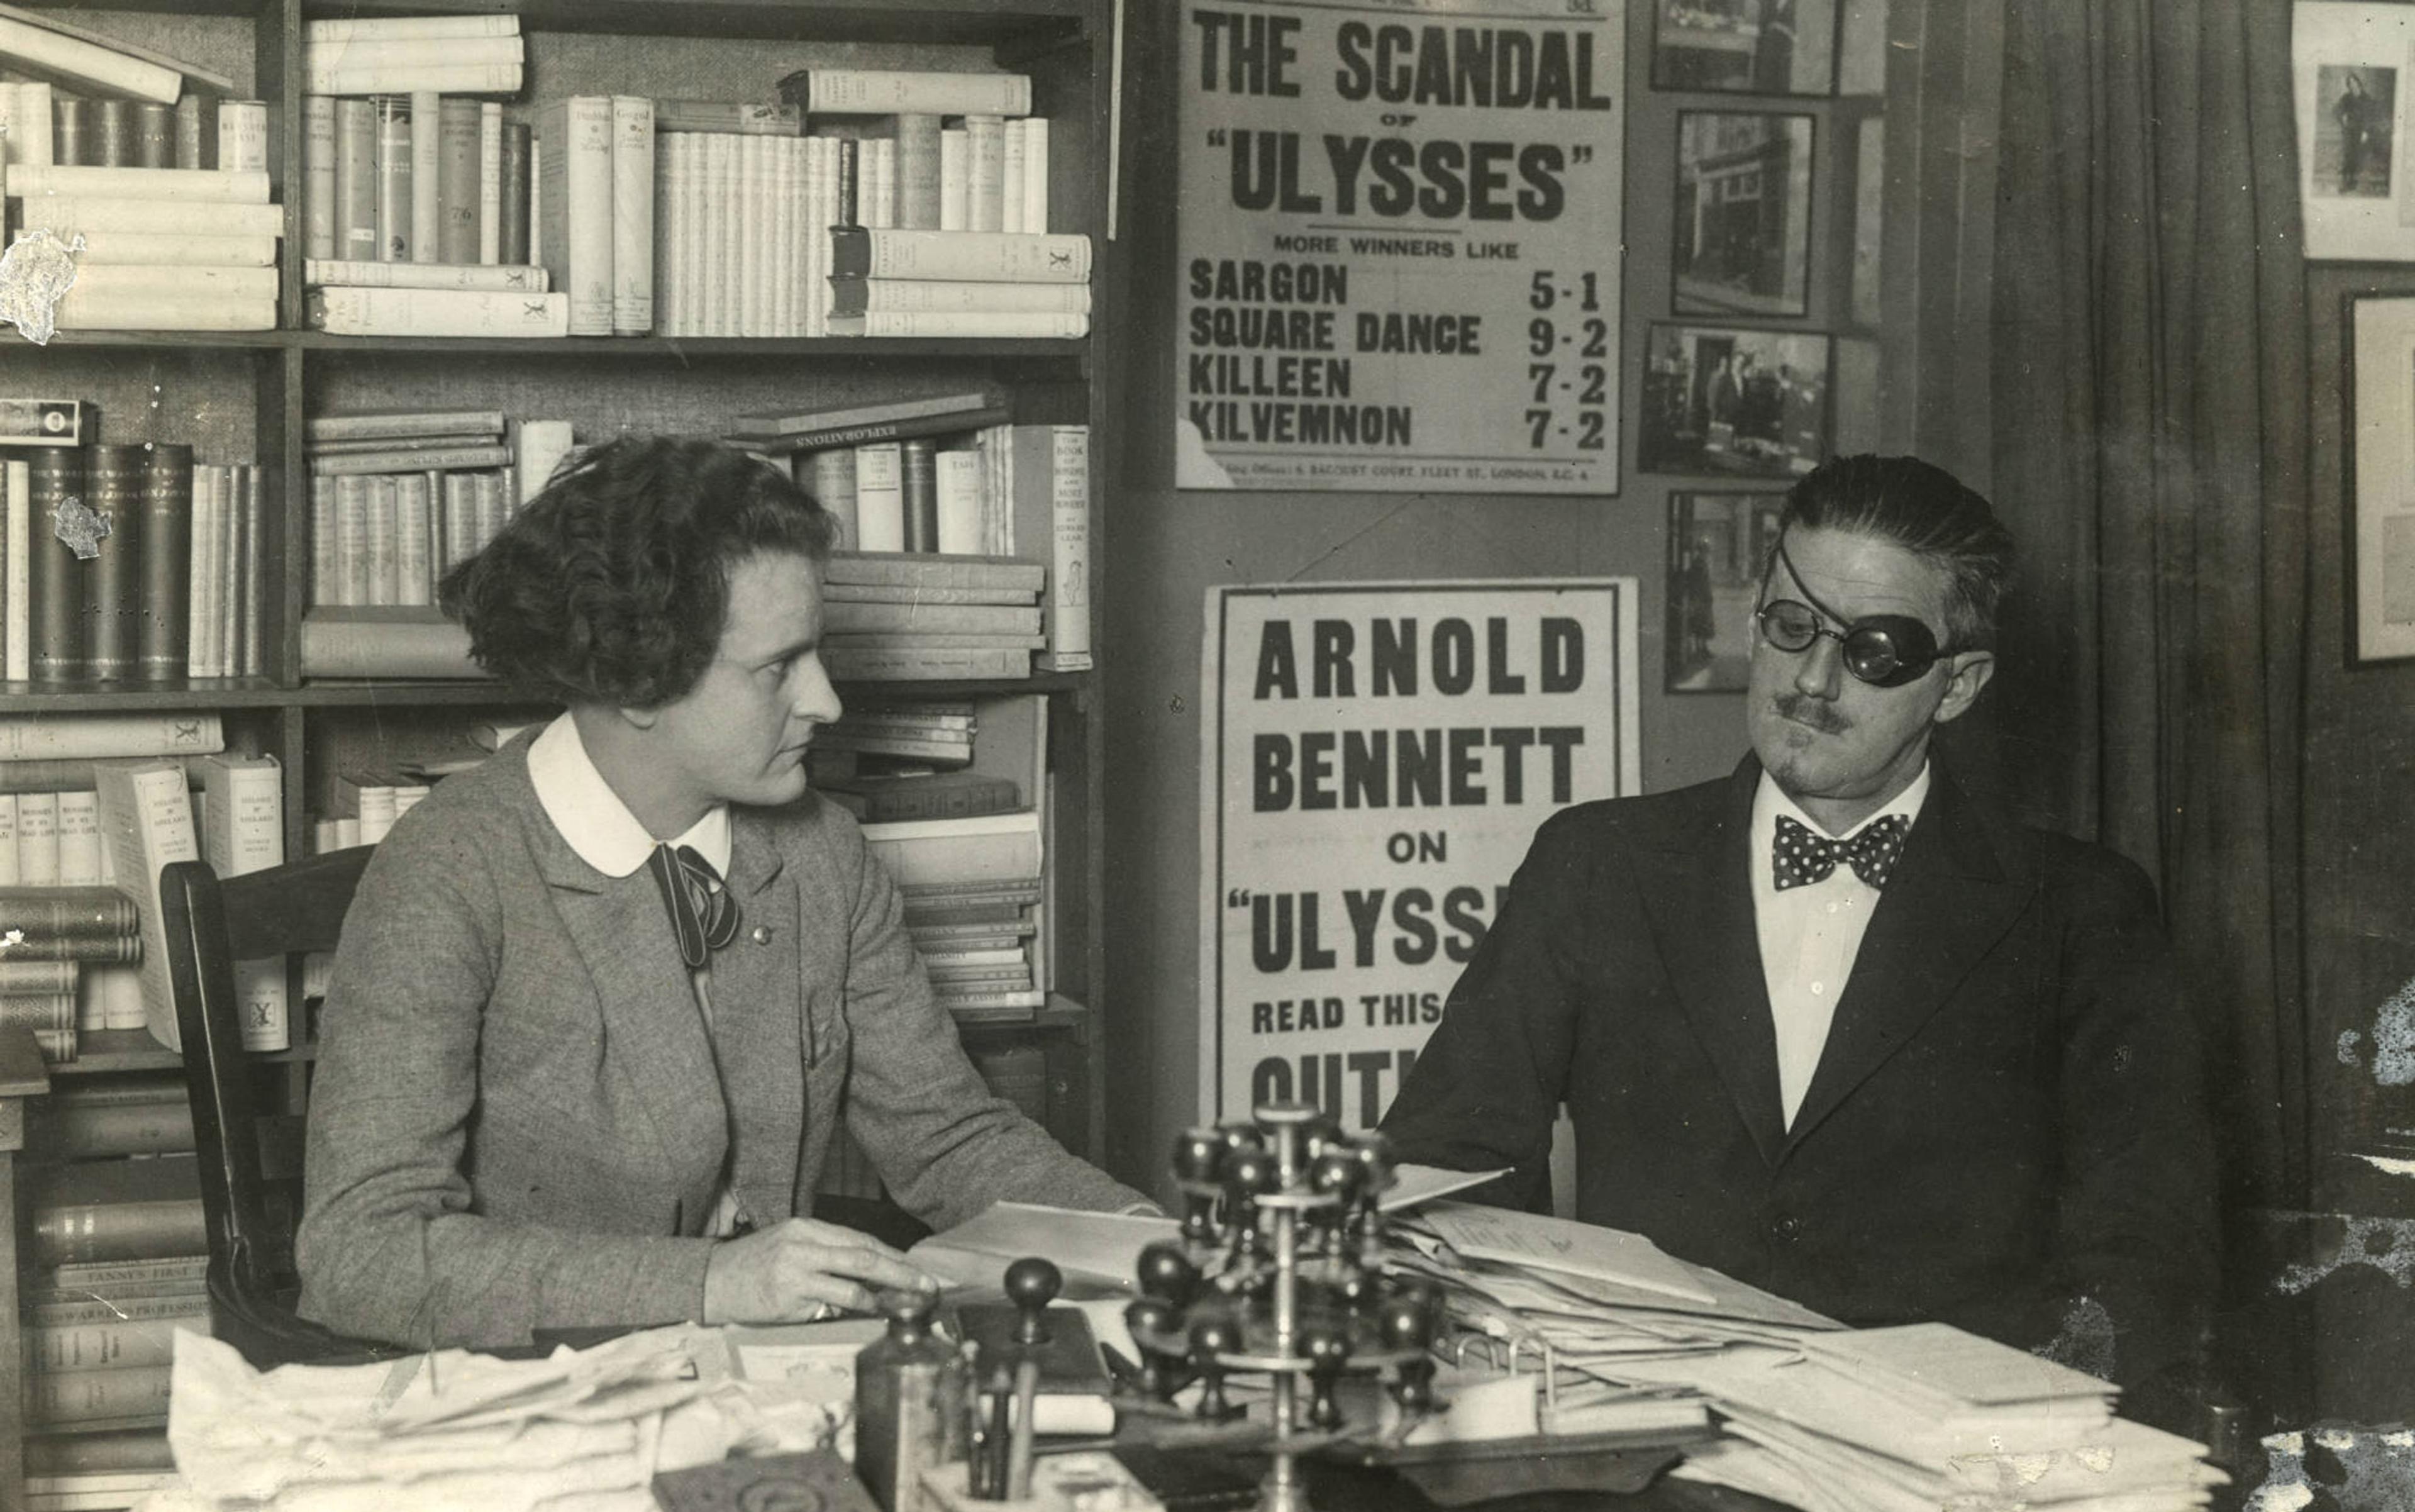 Two people sit at a desk covered in papers. Background includes book shelves and posters about the “Ulysses” novel and Arnold Bennett.